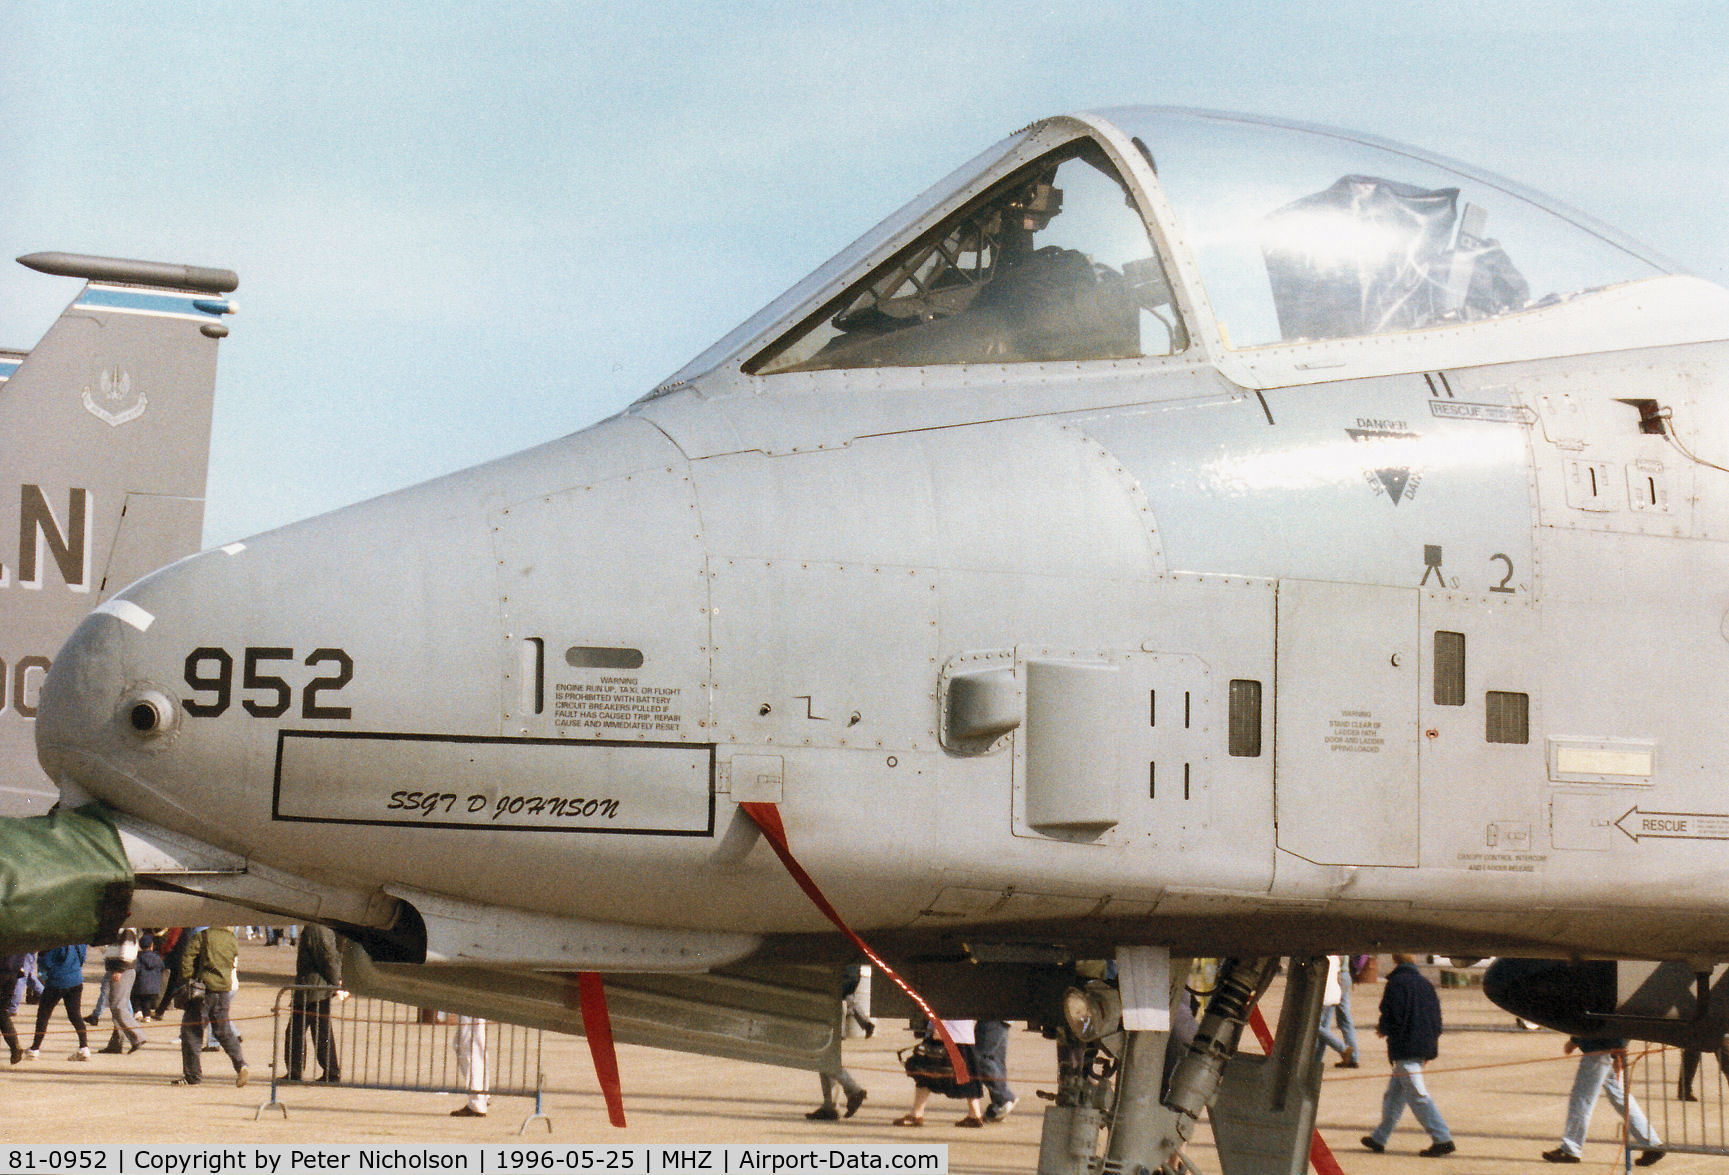 81-0952, 1981 Fairchild Republic A-10A Thunderbolt II C/N A10-0647, A-10A Thunderbolt of Spangdahlem's 81st Fighter Squadron/52nd Fighter Wing on display at the 1996 RAF Mildenhall Air Fete.